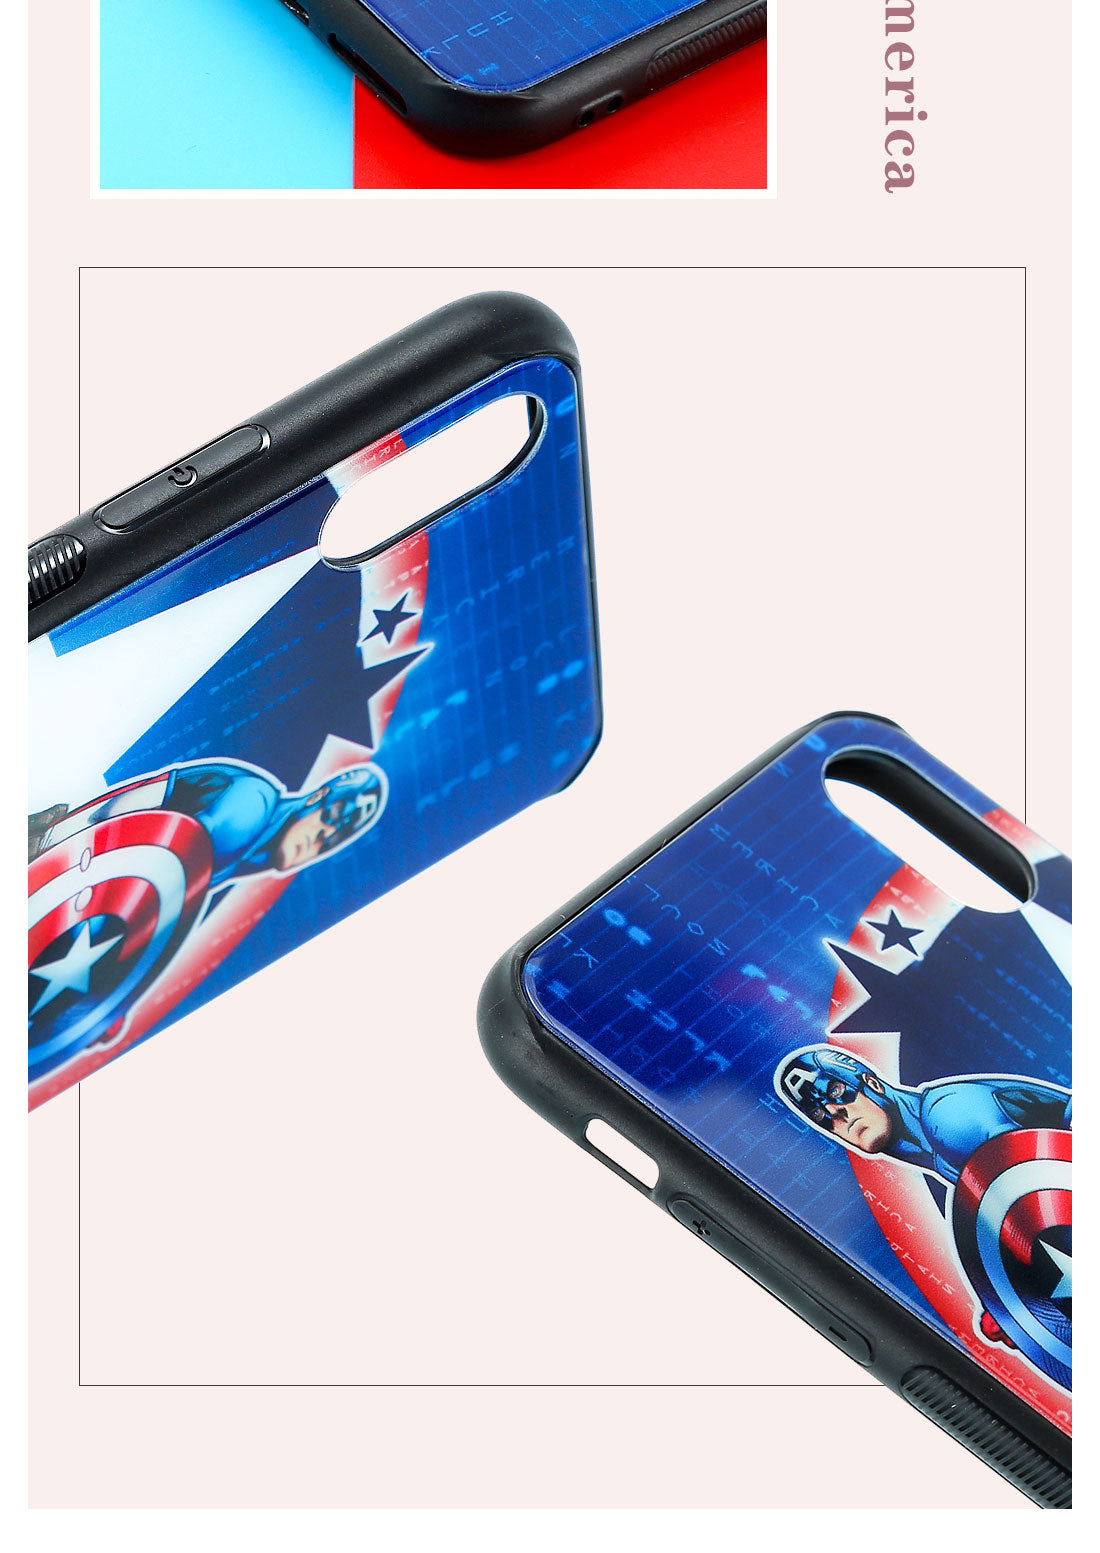 Miniso MARVEL Phone Case for iPhone X/XS 2007242410107